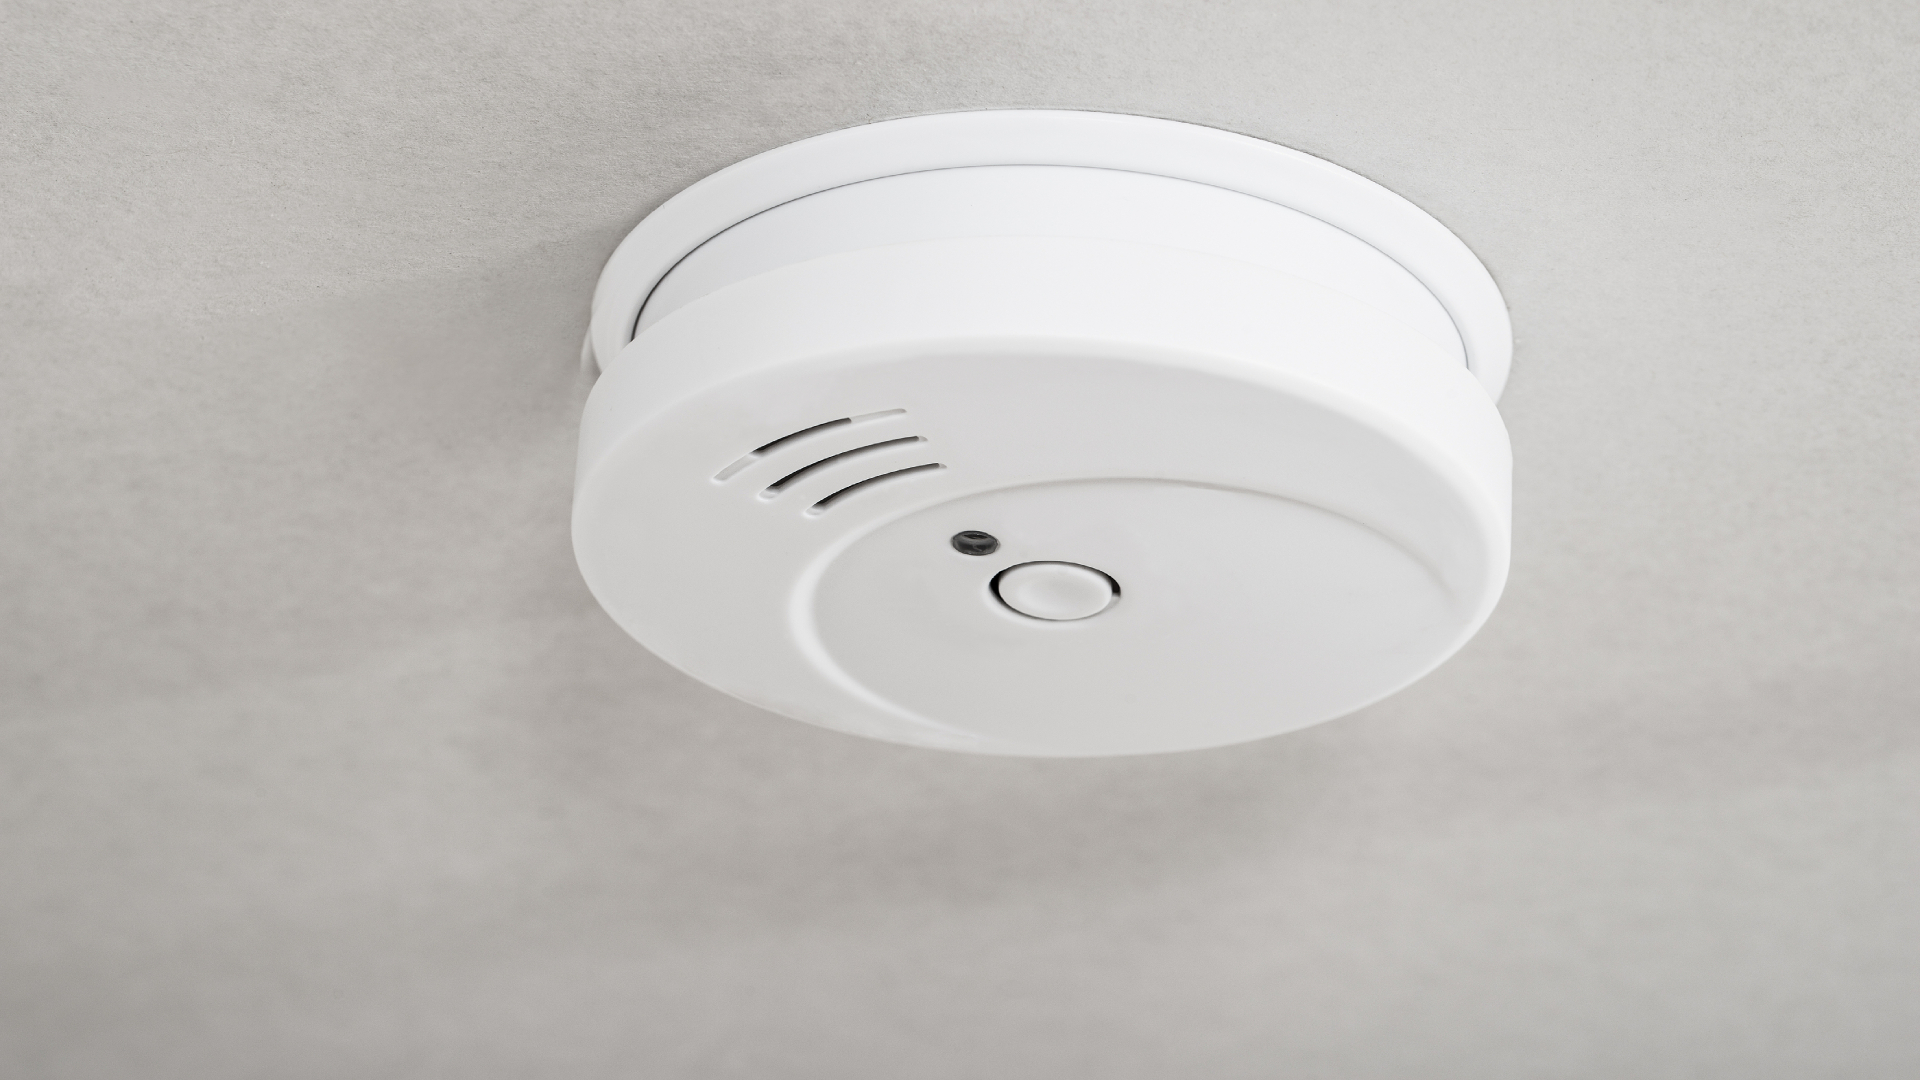 Carbon Monoxide Detection for Your Home Security System